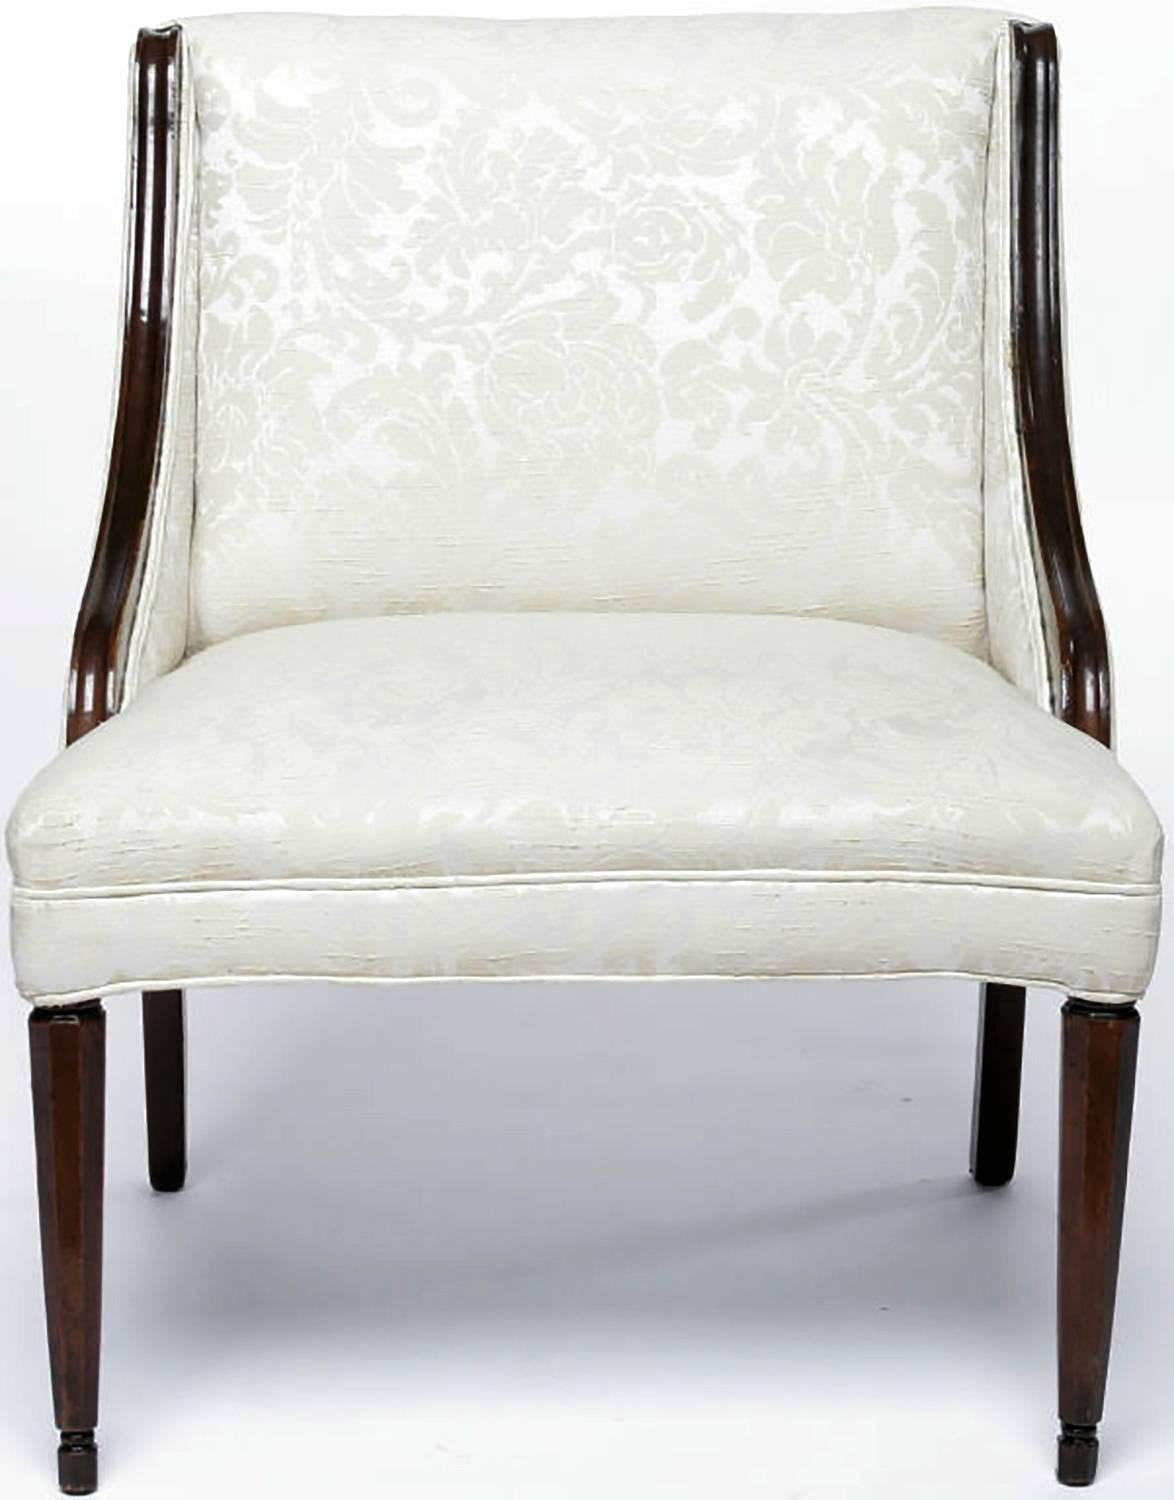 Wonderful side chairs with gondola arms and dark mahogany wood frames. Upholstered in vintage ivory damask fabric.